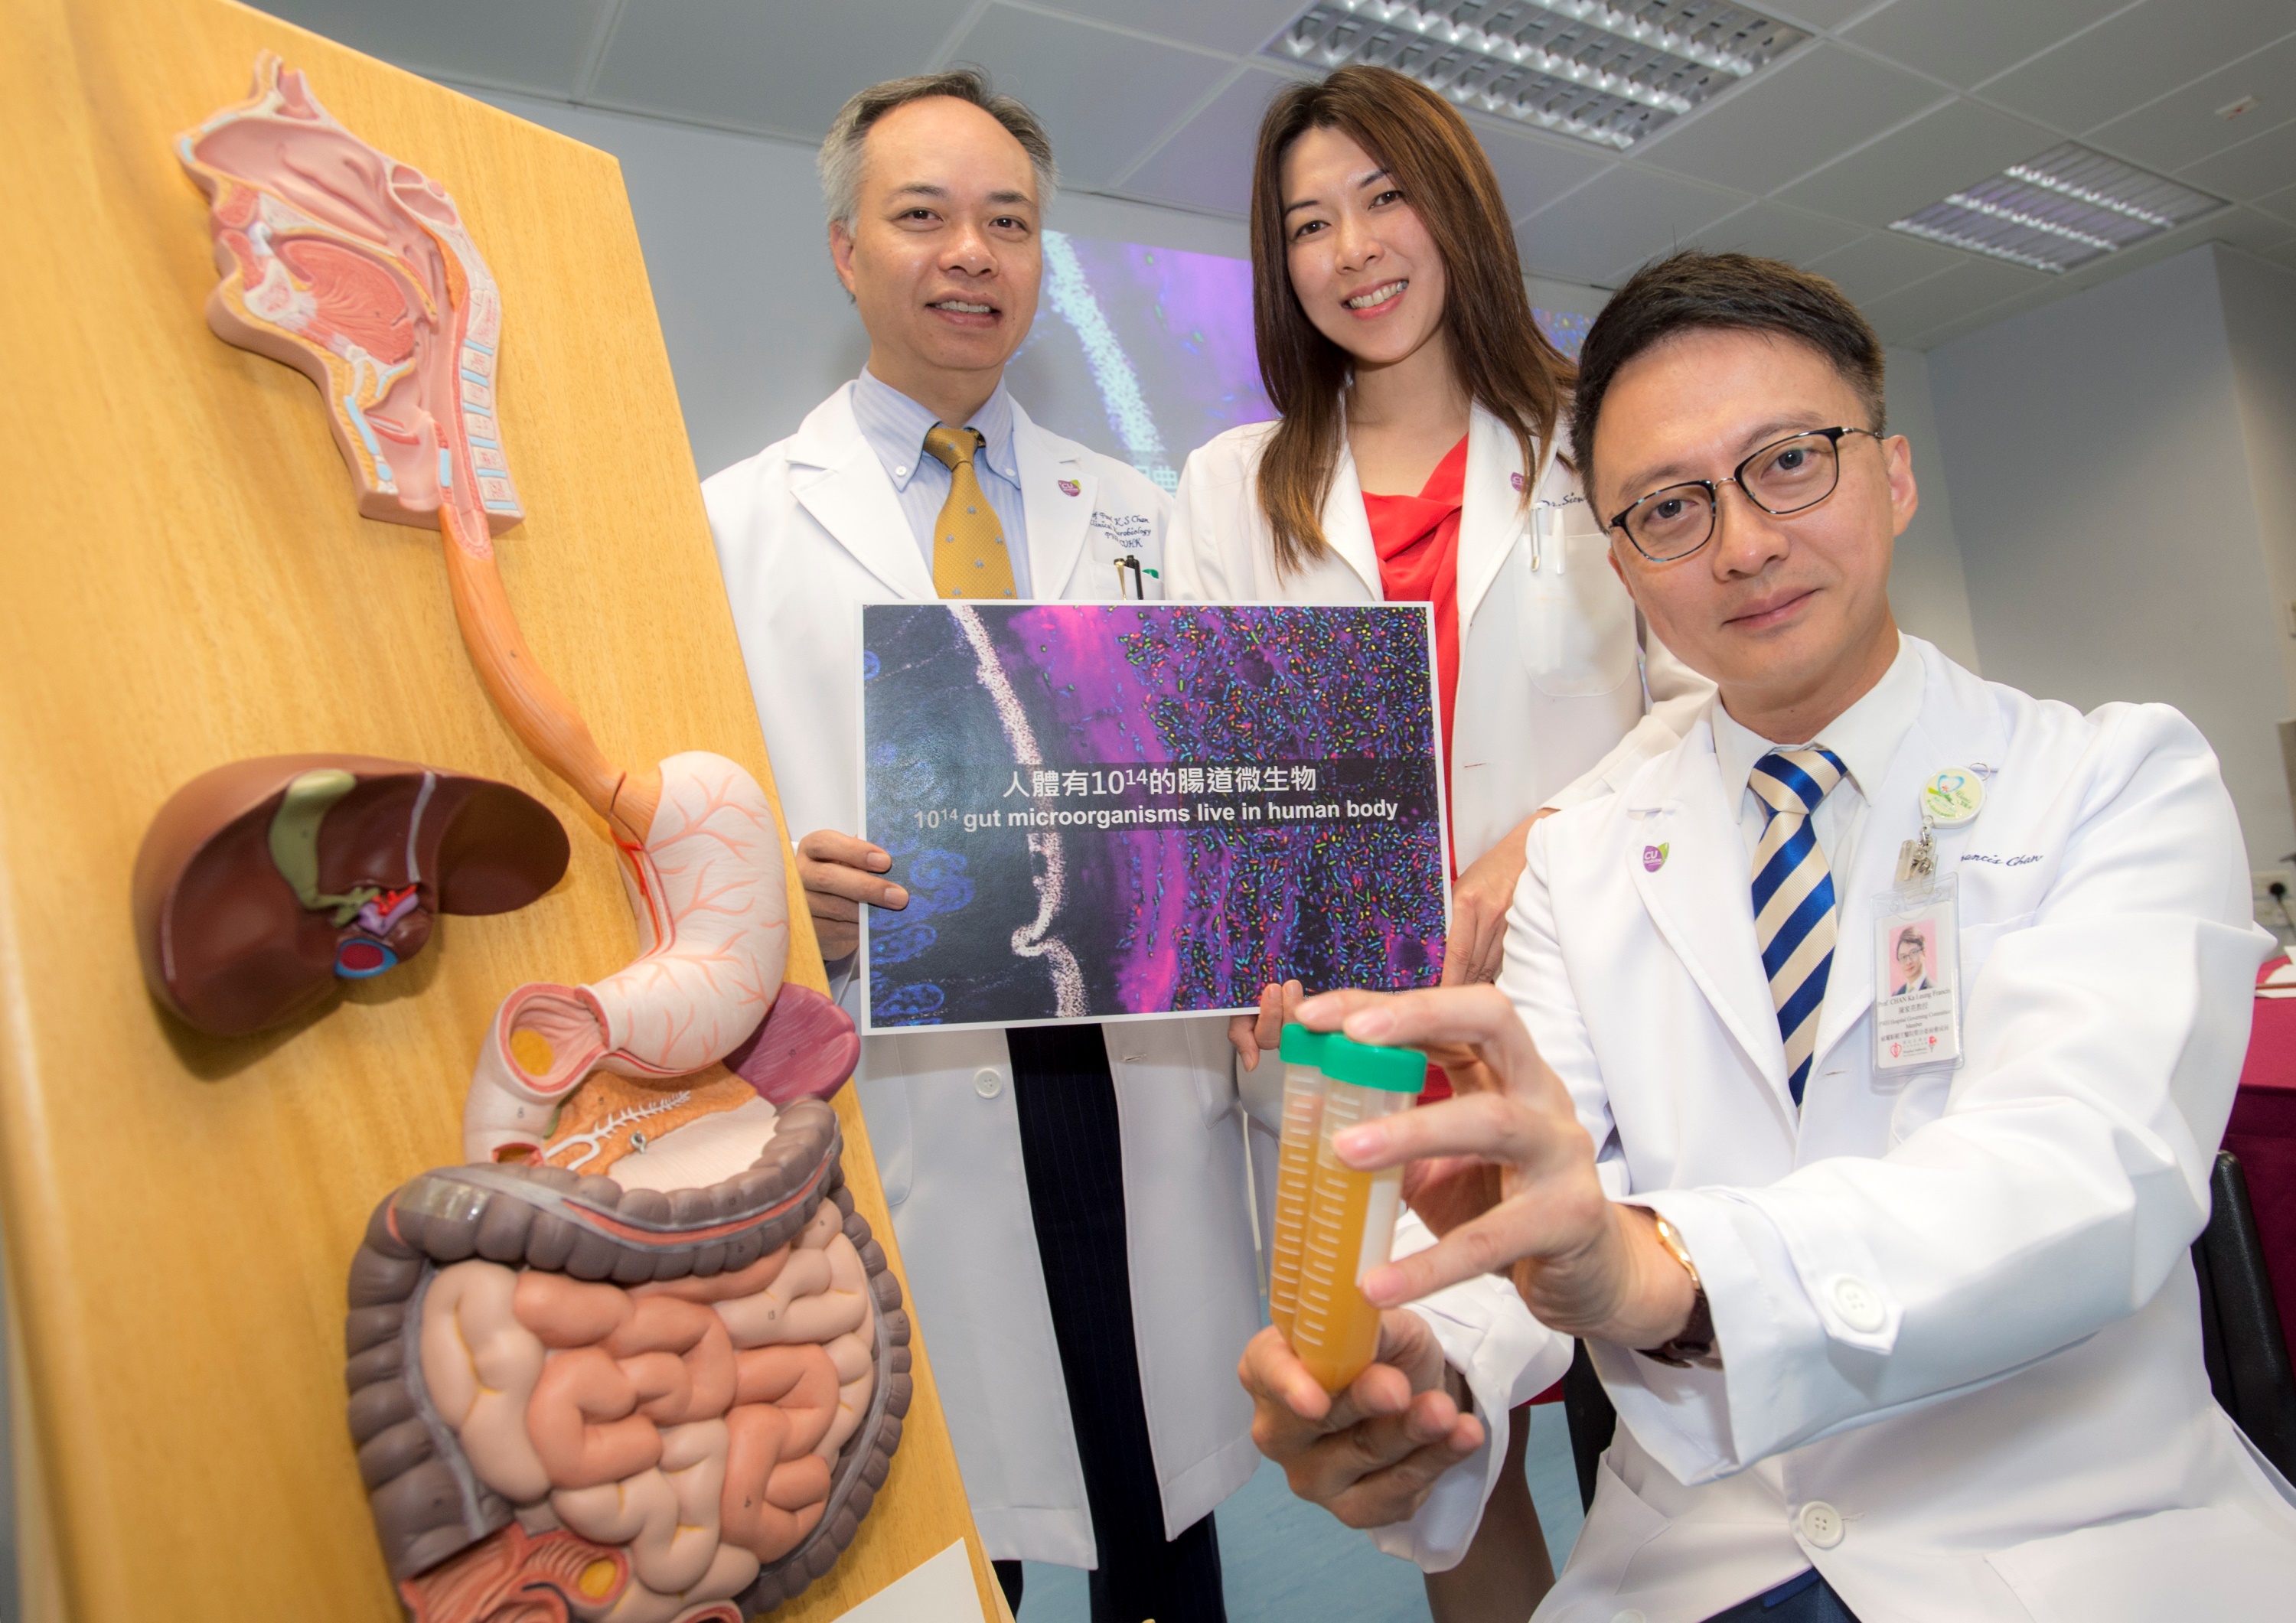 (From left) Professor Paul Kay Sheung CHAN, Chairman of the Department of Microbiology; Professor Siew Chien NG, Professor of the Department of Medicine and Therapeutics; and Professor Francis KL CHAN, Dean of the Faculty of Medicine and Choh-Ming Li Professor of Medicine and Therapeutics at CUHK